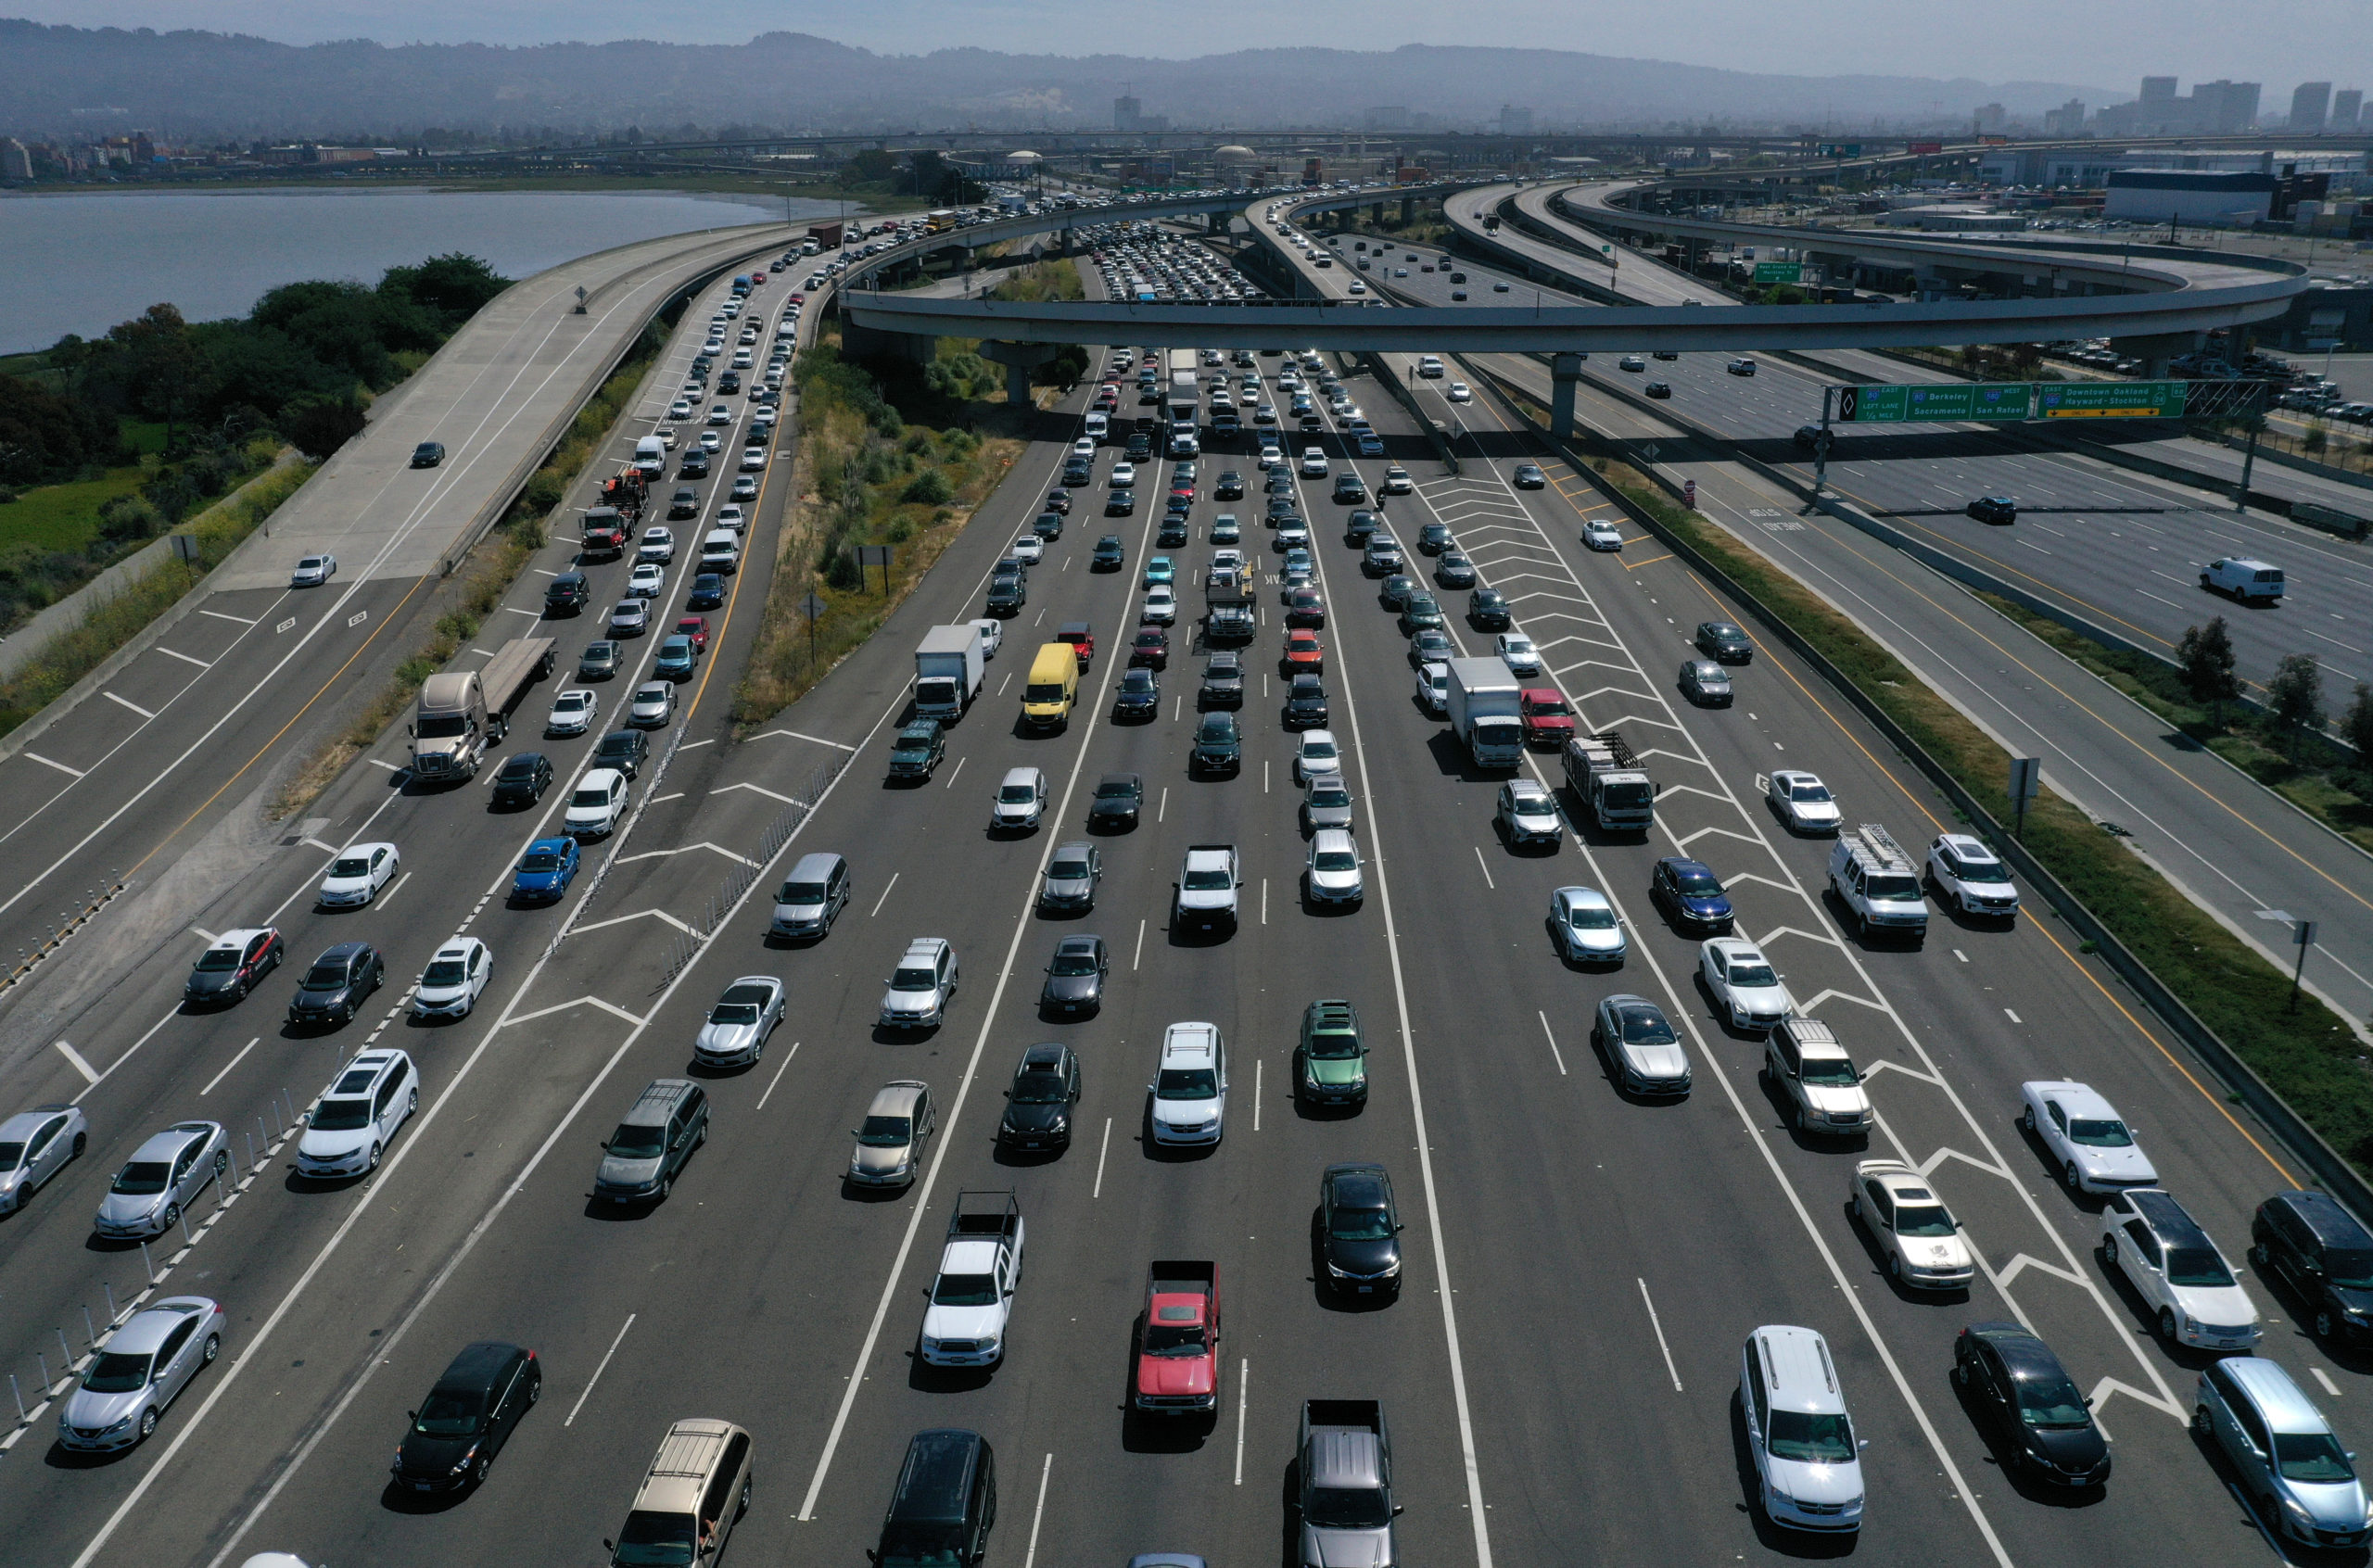 SAN RAFAEL, CALIFORNIA - JULY 25: Traffic backs up at the San Francisco-Oakland Bay Bridge toll plaza along Interstate 80 on July 25, 2019 in Oakland, California. The State of California and four of the largest automakers in the world - Ford, VW, Honda and BMW - have struck a deal to reduce auto emissions in the State of California ahead of the Trump administration's plans to eliminate an Obama-era regulation to reduce emissions from cars that are believed to contribute to global warming. (Photo by Justin Sullivan/Getty Images)